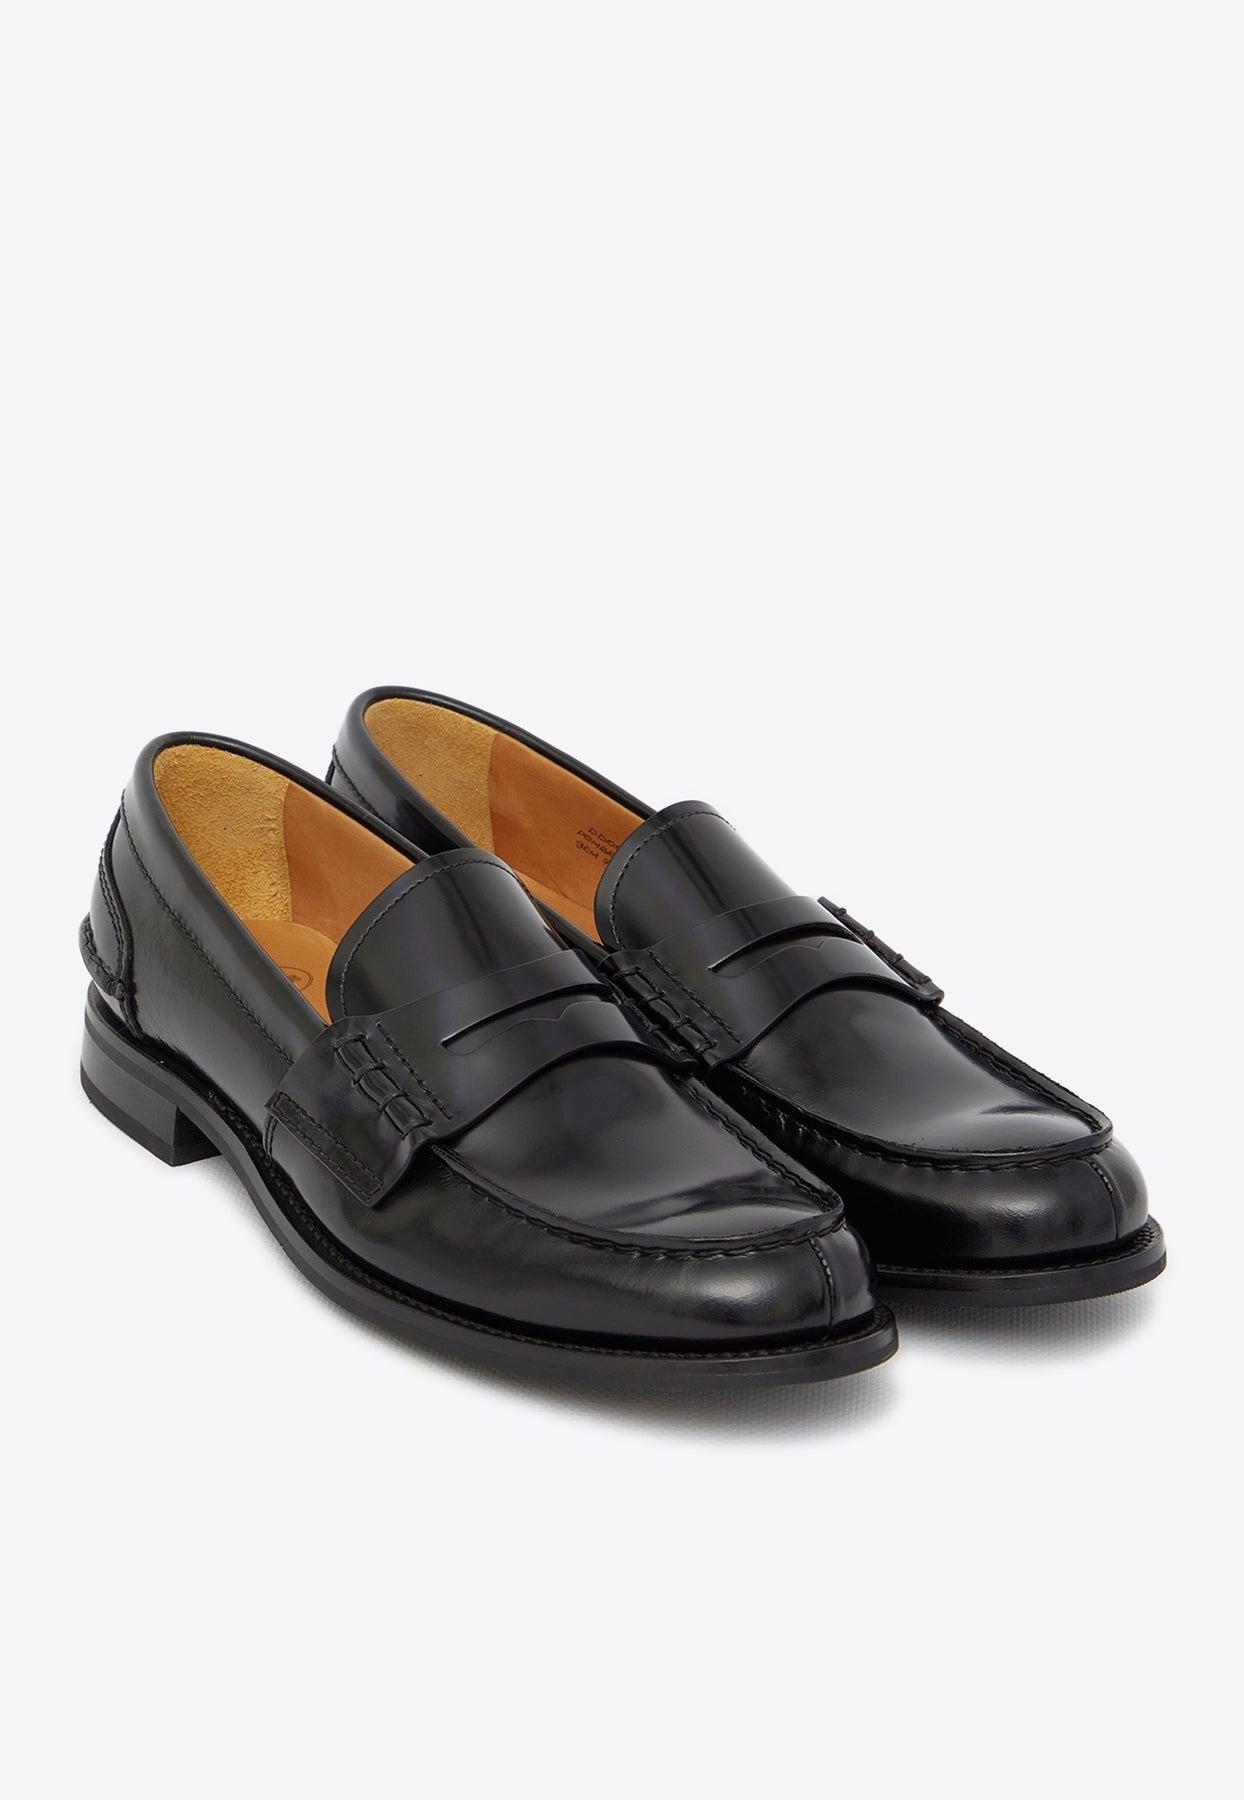 Church's Man's Calf Leather Loafer